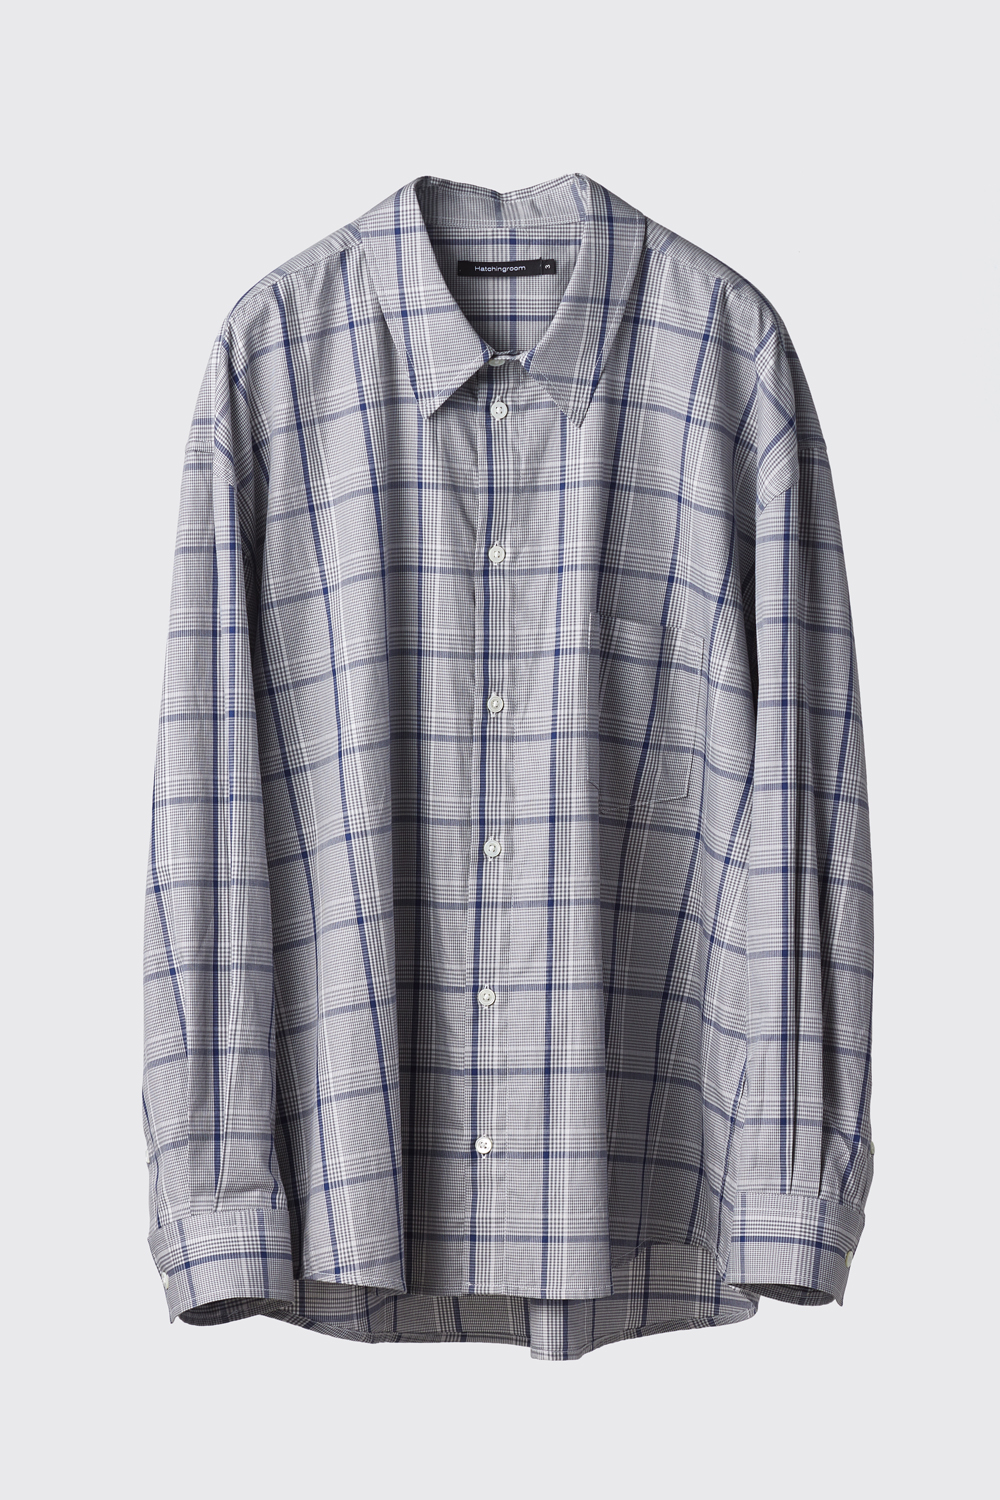 [soui. Exclusive] Classic Shirt Houndstooth Check Grey/Blue